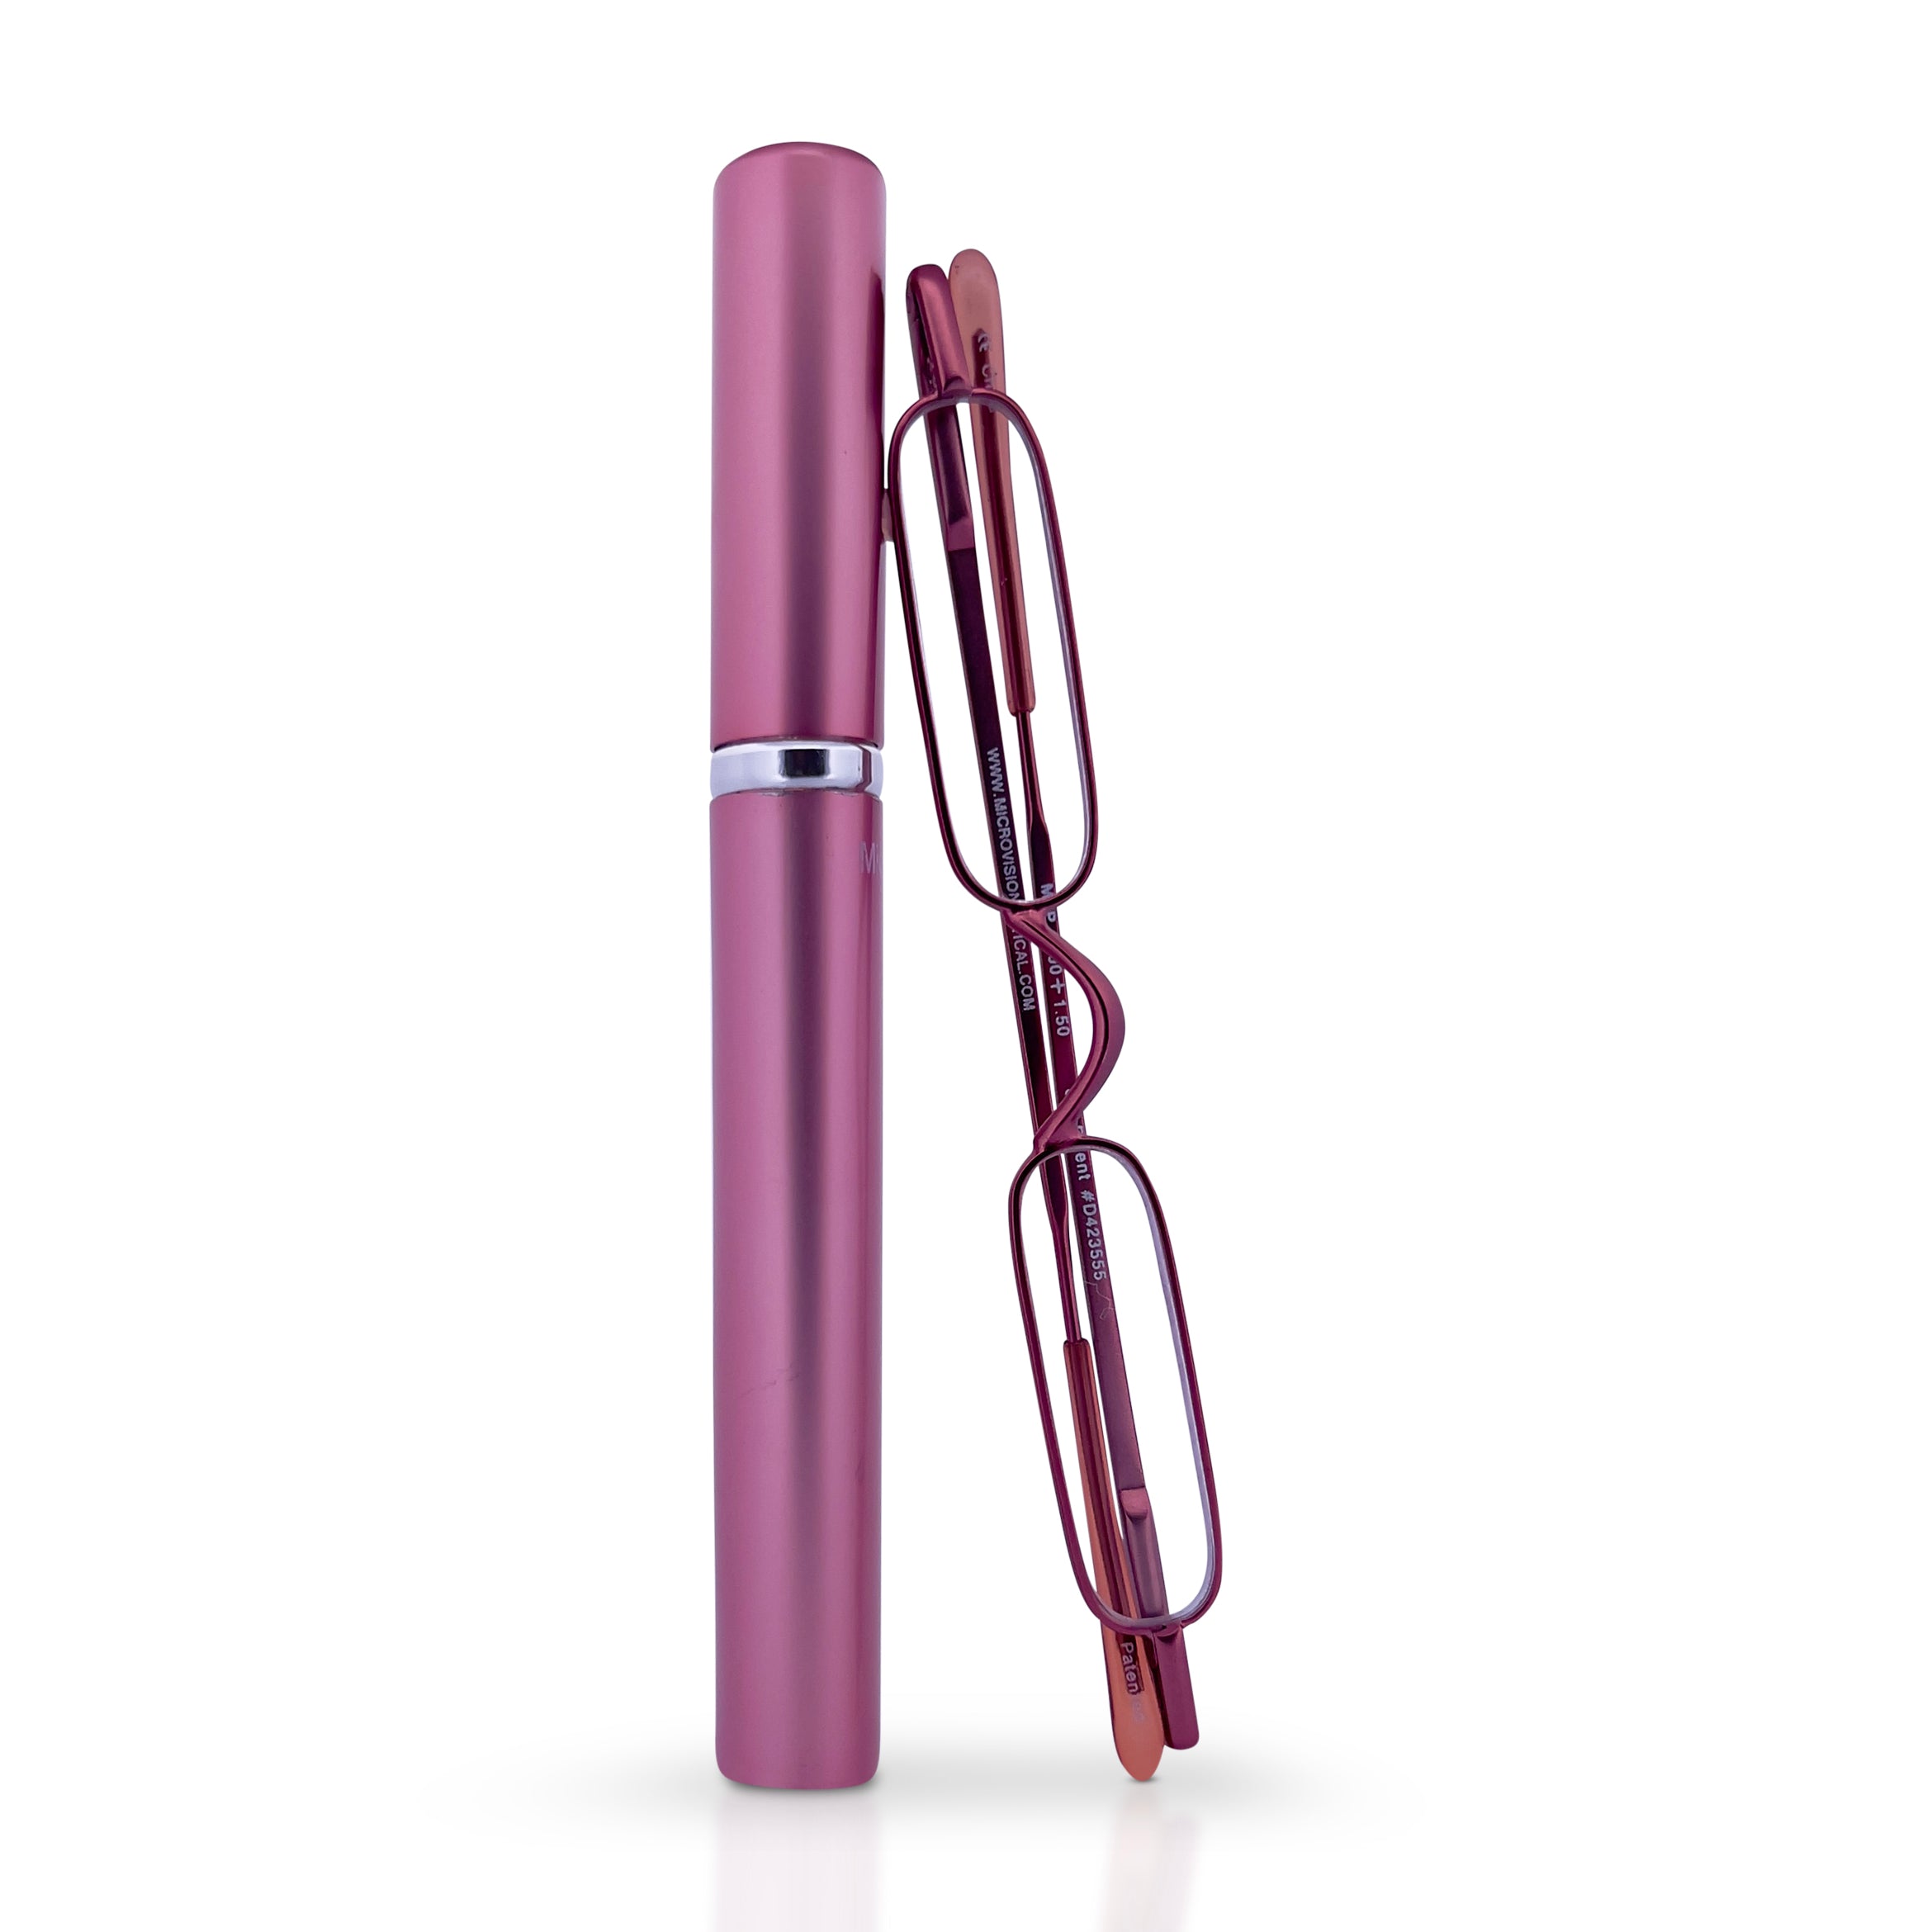 Purple sleek, compact, patented, stainless steel, original mini readers perfect for on the go